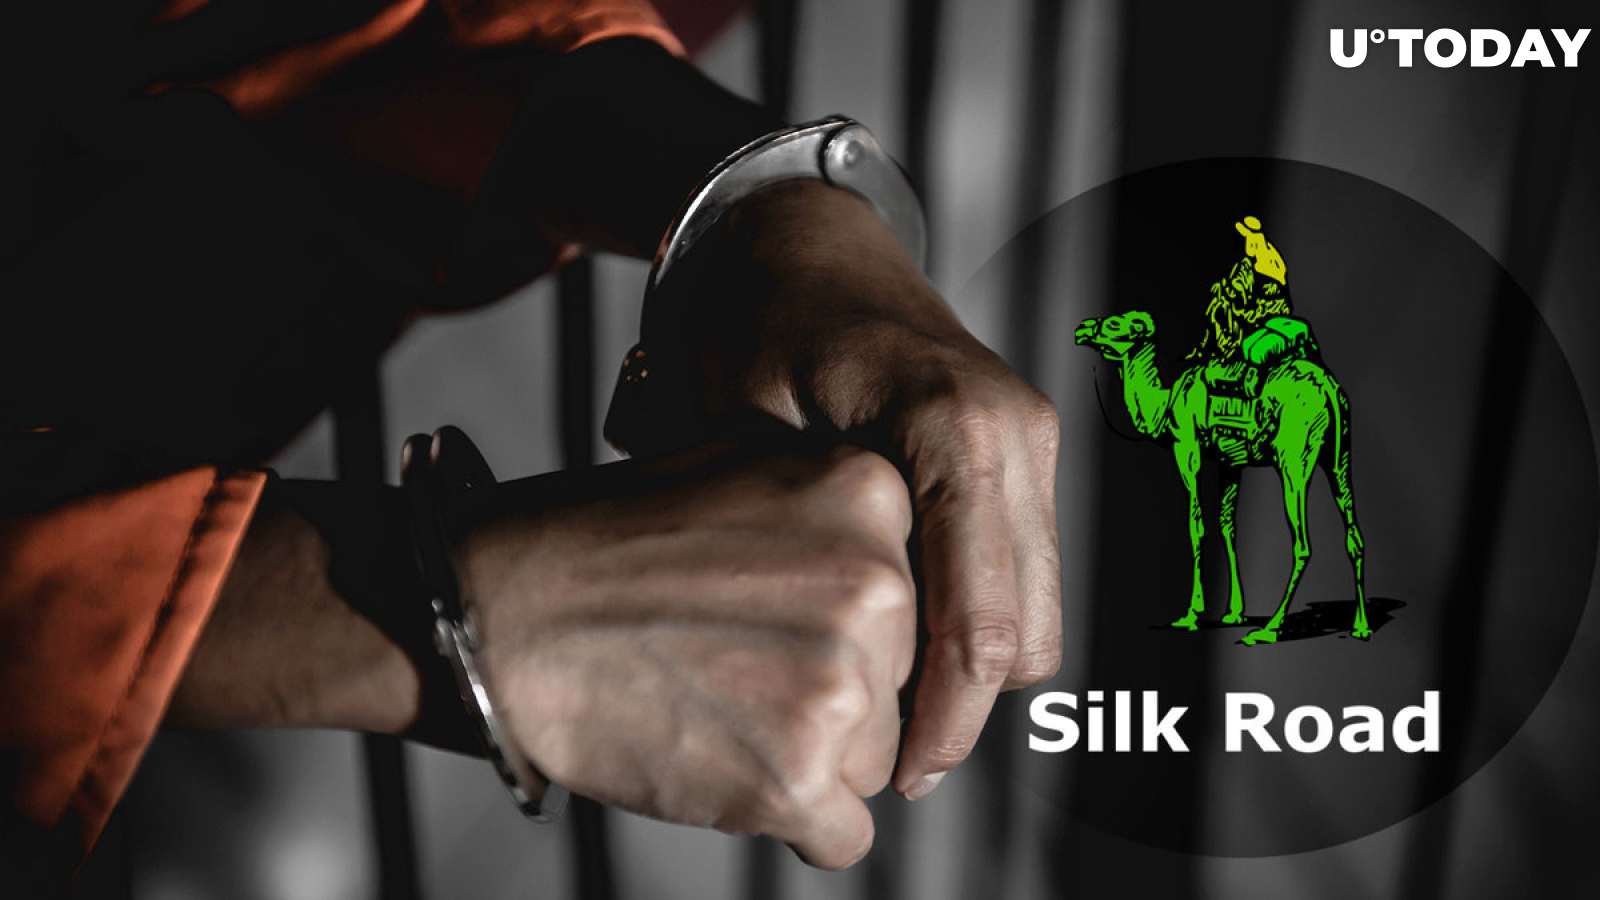 Silk Road Founder Ross Ulbricht Fears He May Be Silenced in Prison Forever: Details